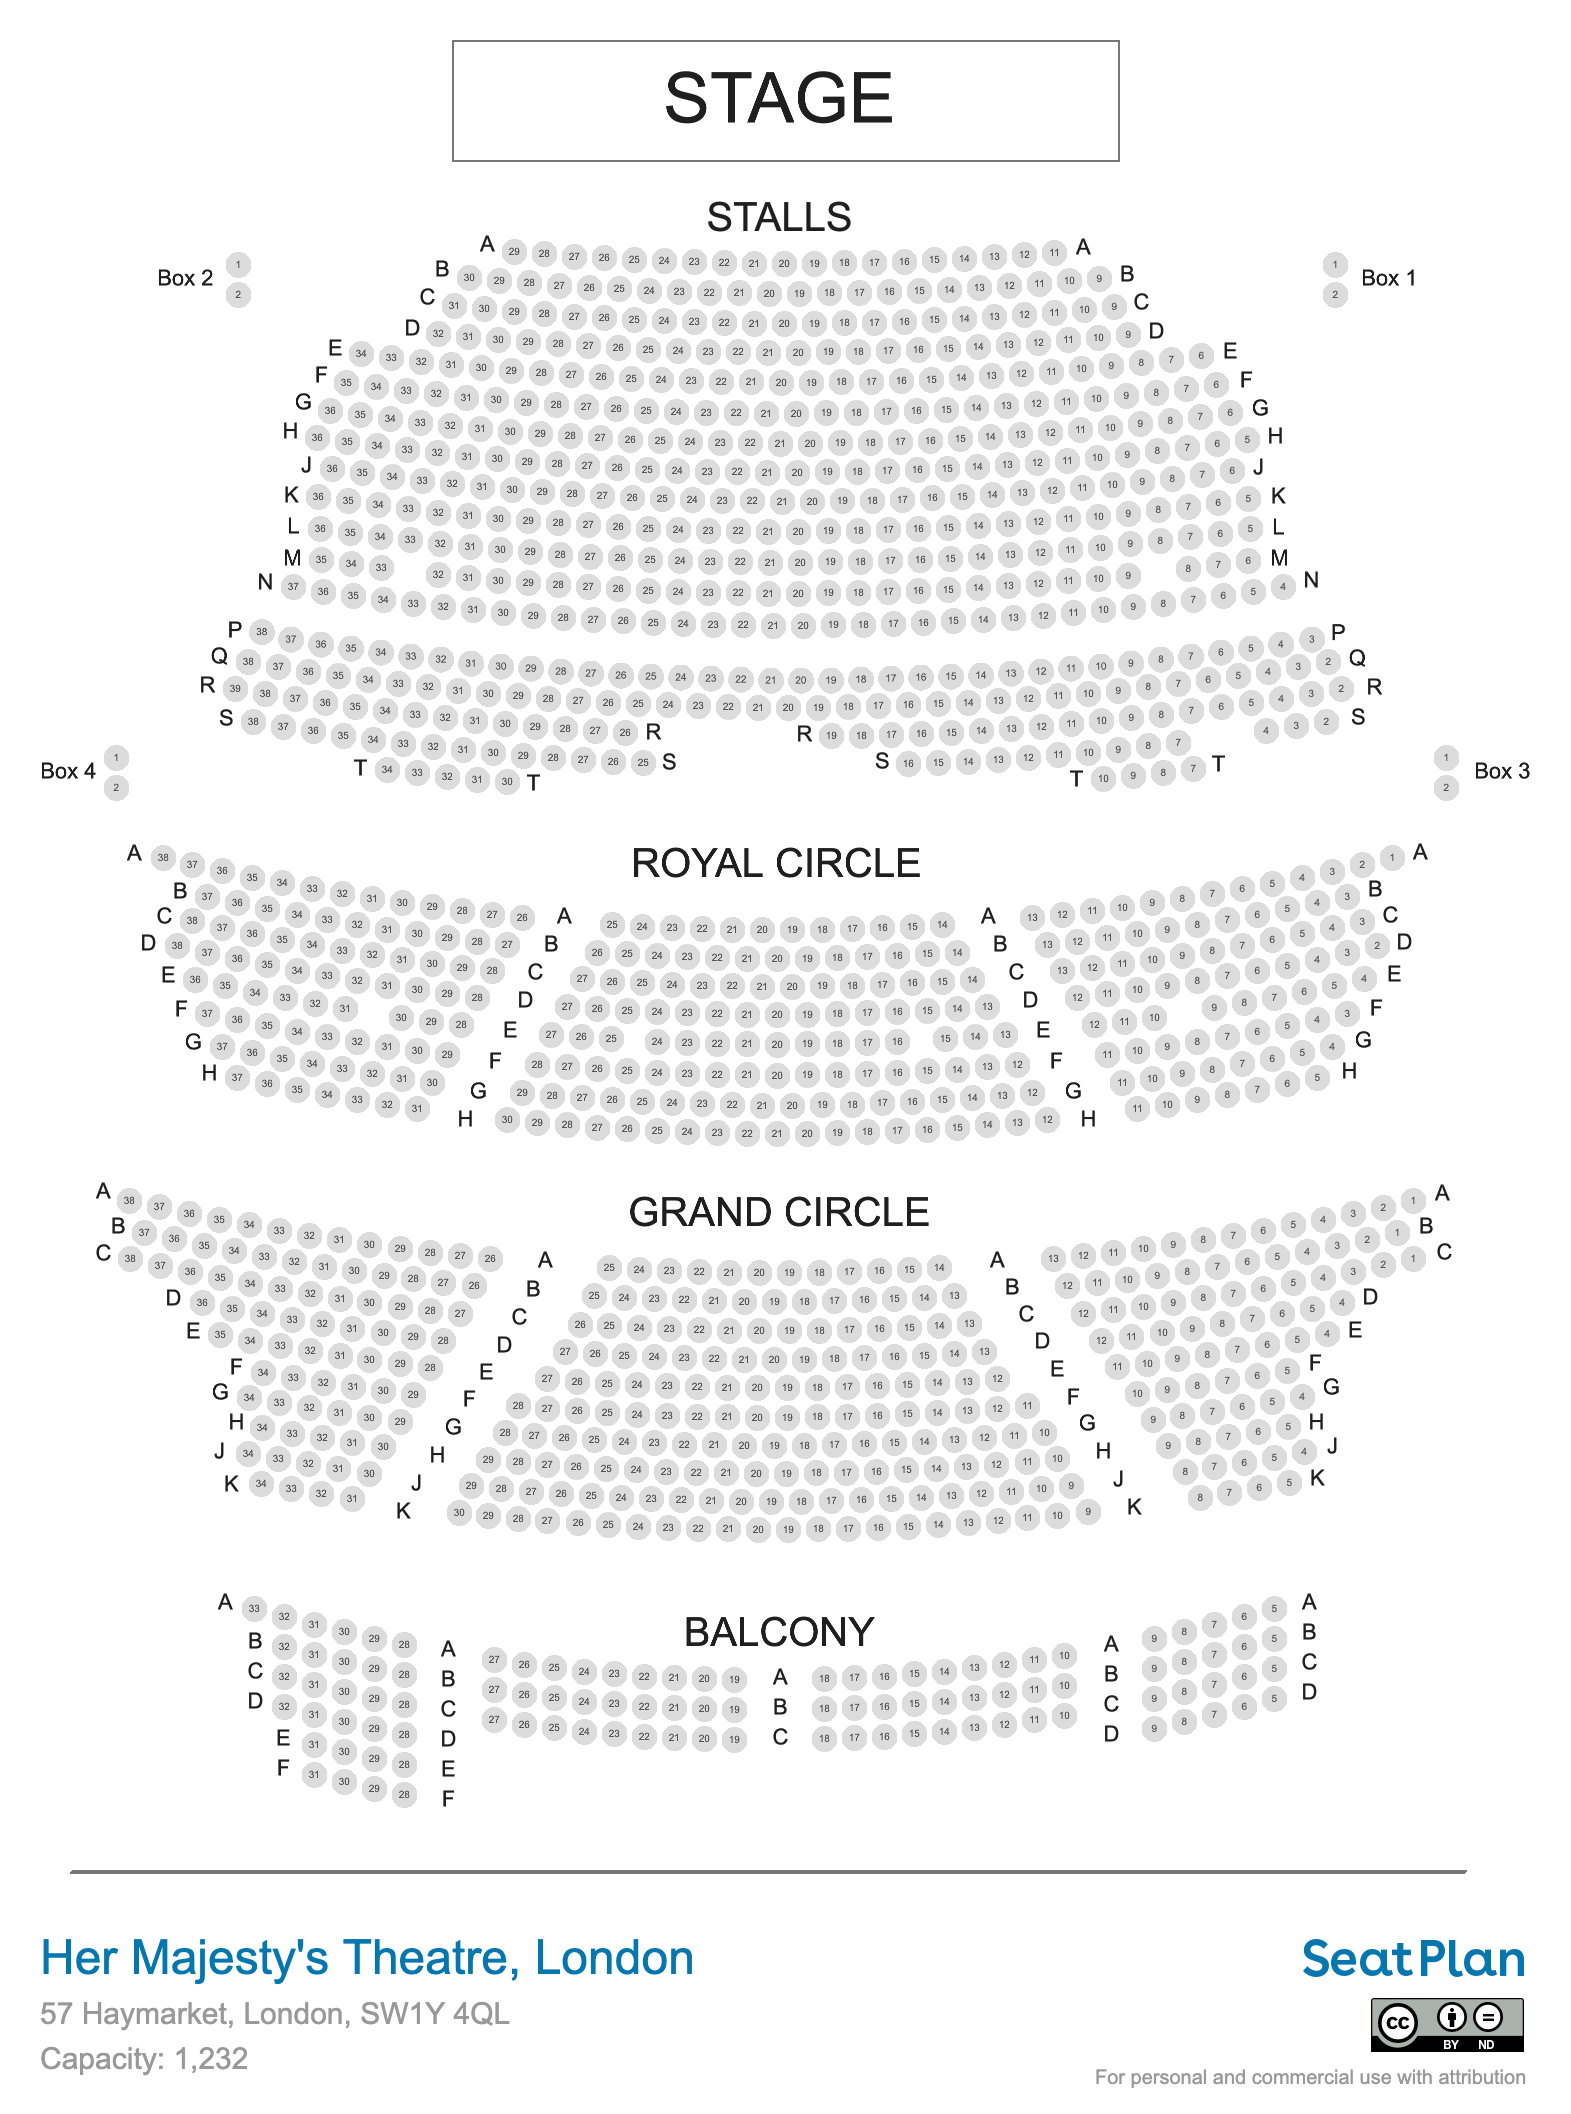 Her Majesty's Theatre seating plan